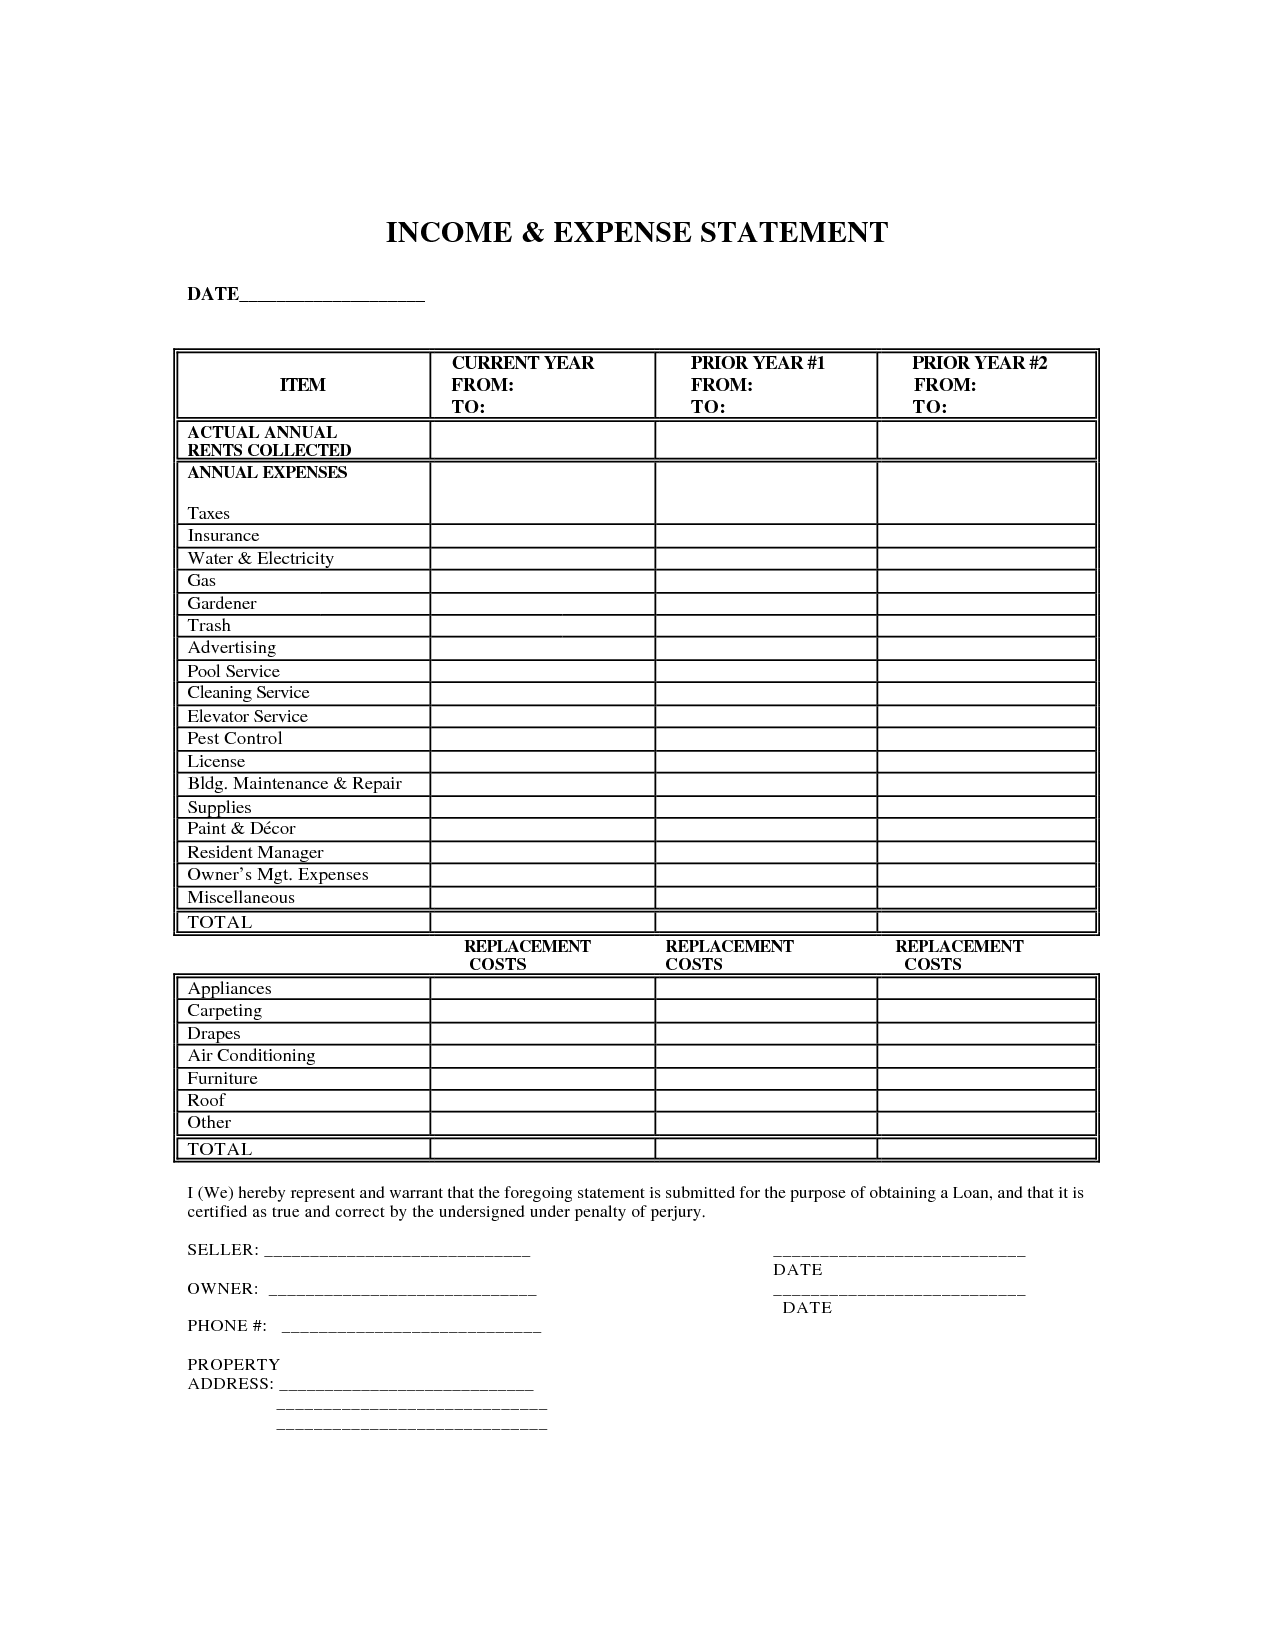 Profit and Loss Statement Templates Image